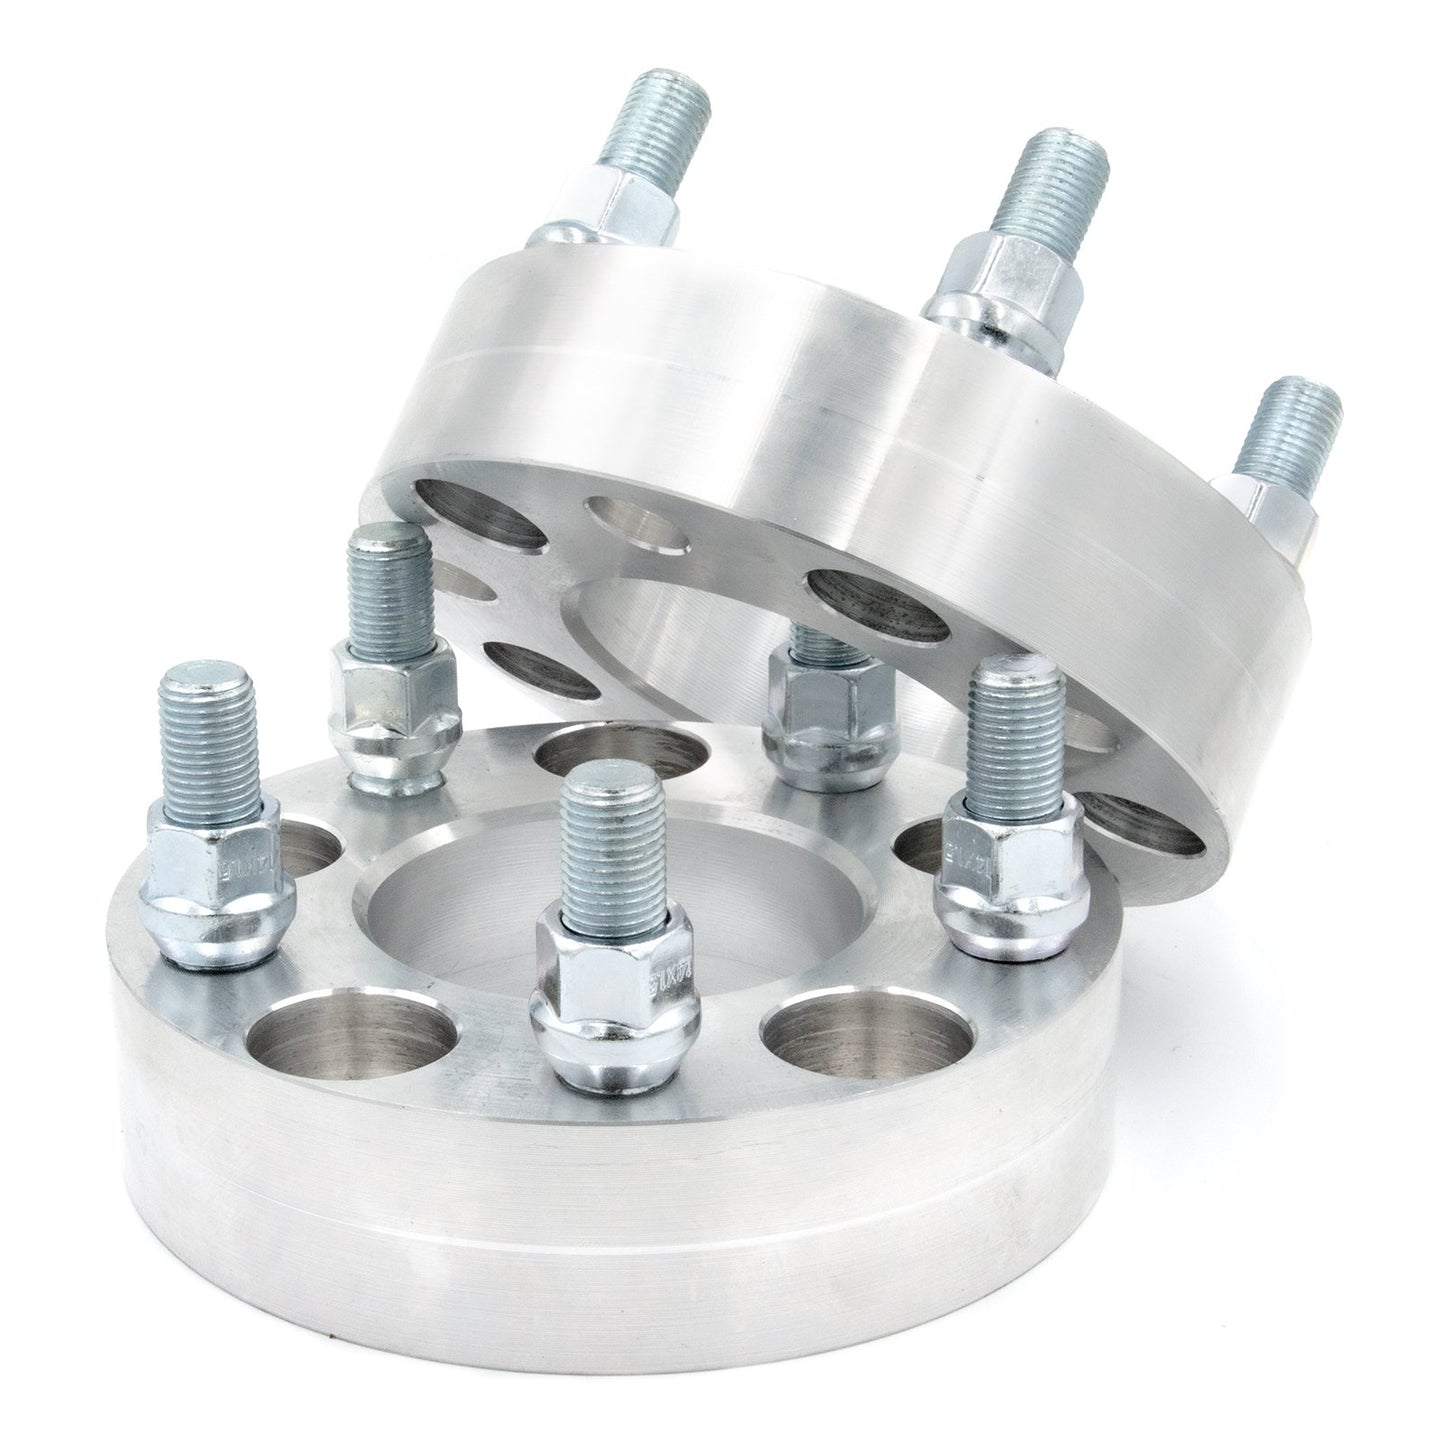 5x130 to 5x120 Wheel Spacer/Adapter - Thickness: 3/4"- 4"